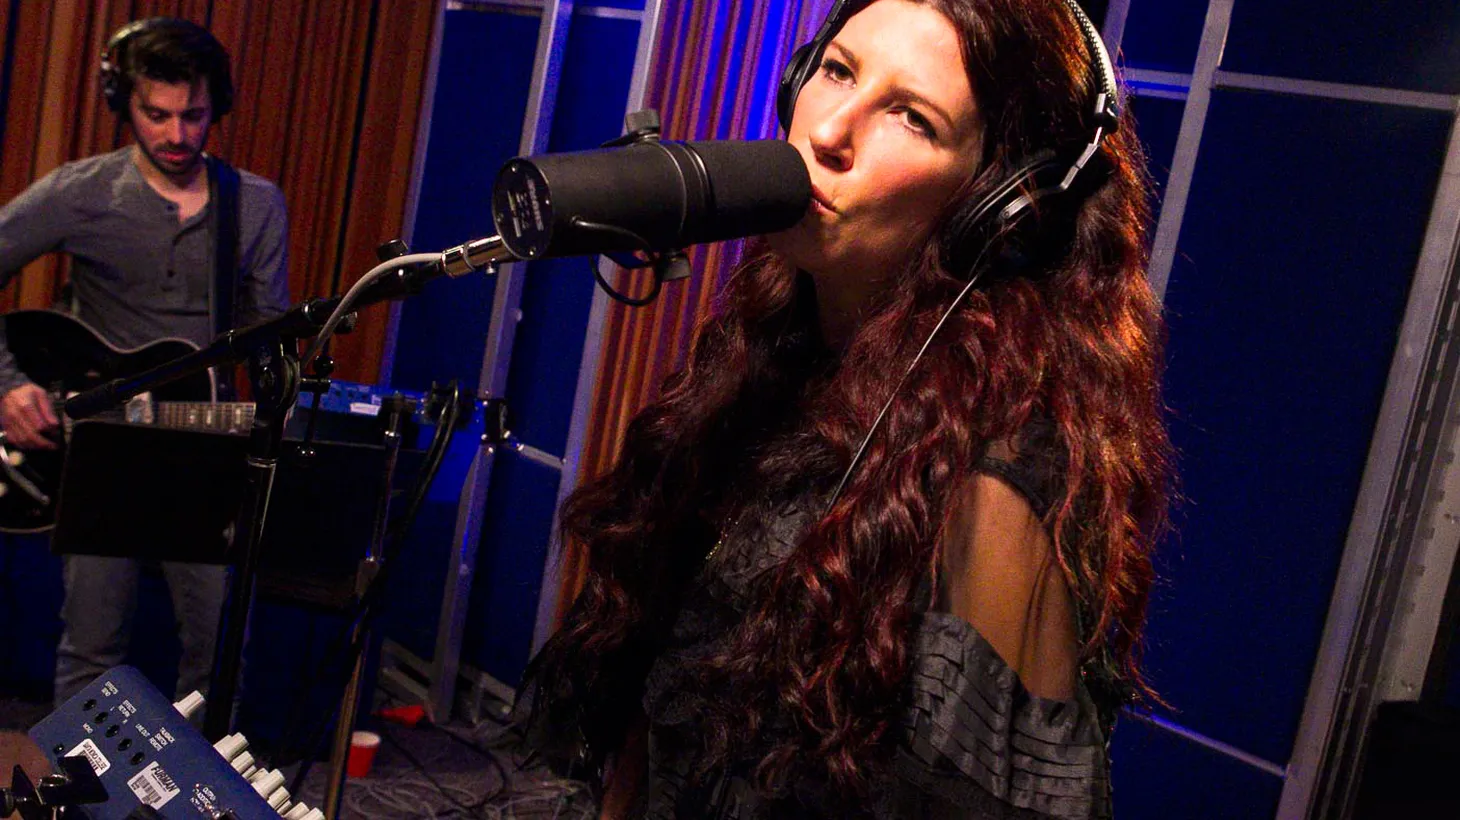 Shana Halligan and her sultry vocal stylings guided the jazzy trip hop duo Bitter:Sweet to success in the mid-2000's. She returns to our studio for a live session around her very personal sophomore solo album, Back to Me.